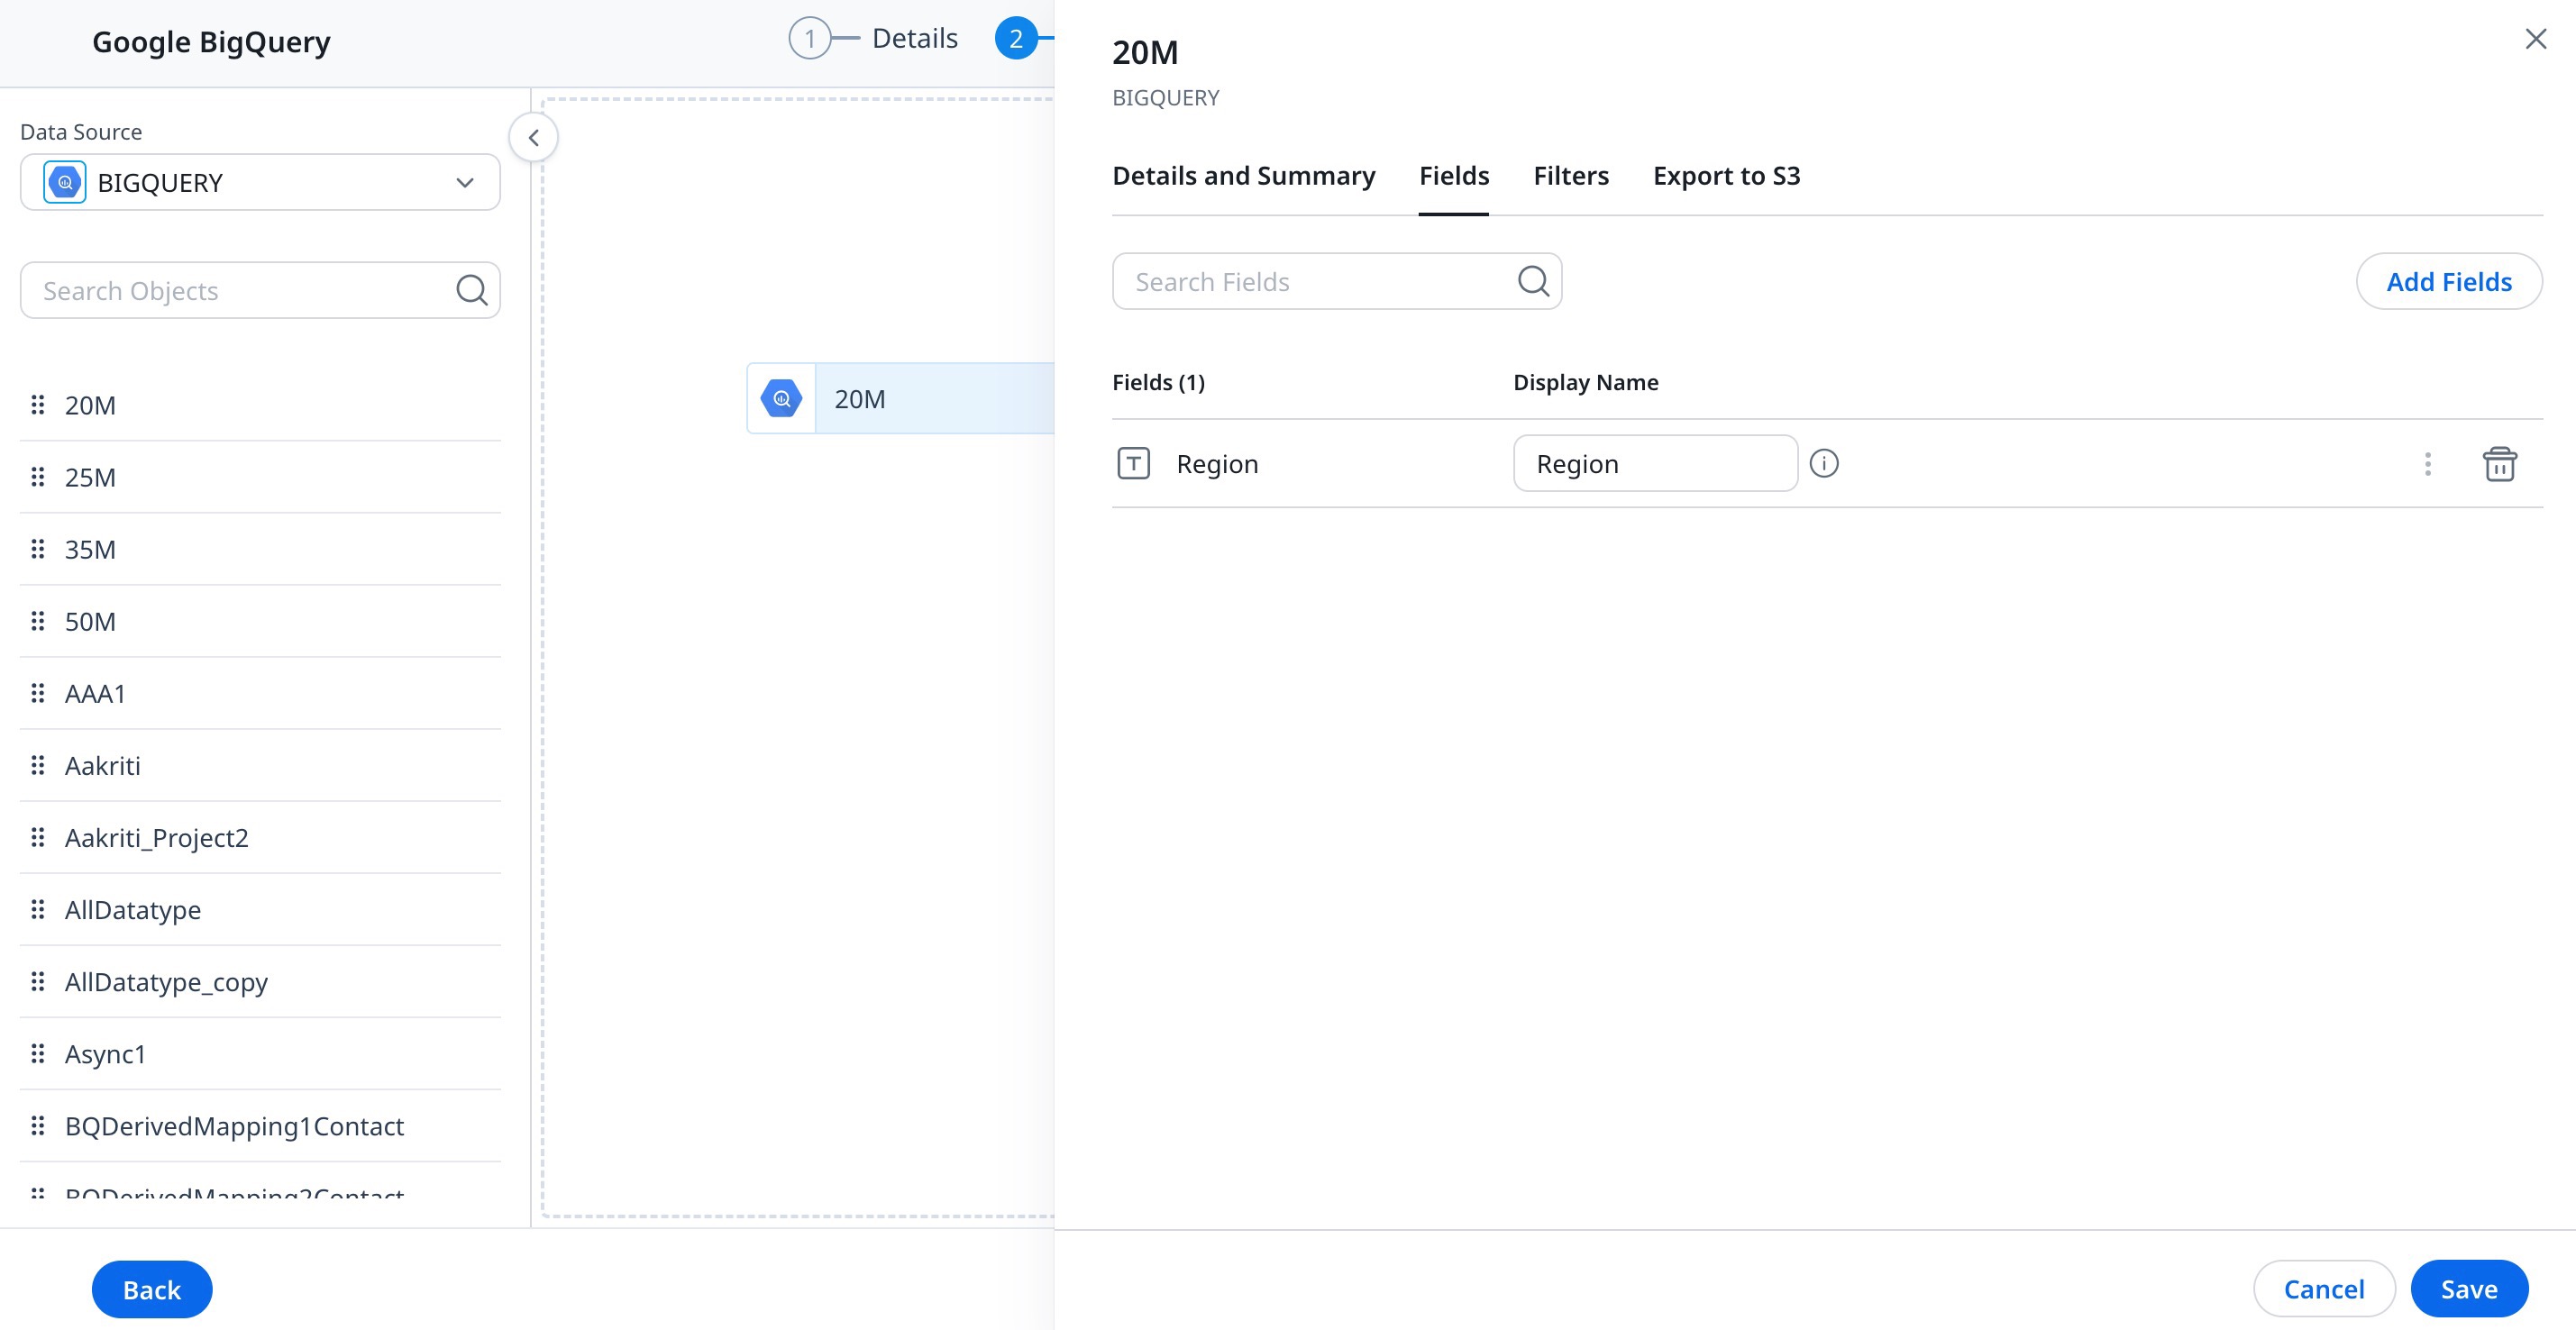 Configuration screen in Data Designer showing the 'Region' field selected for the '20M' BigQuery data source.